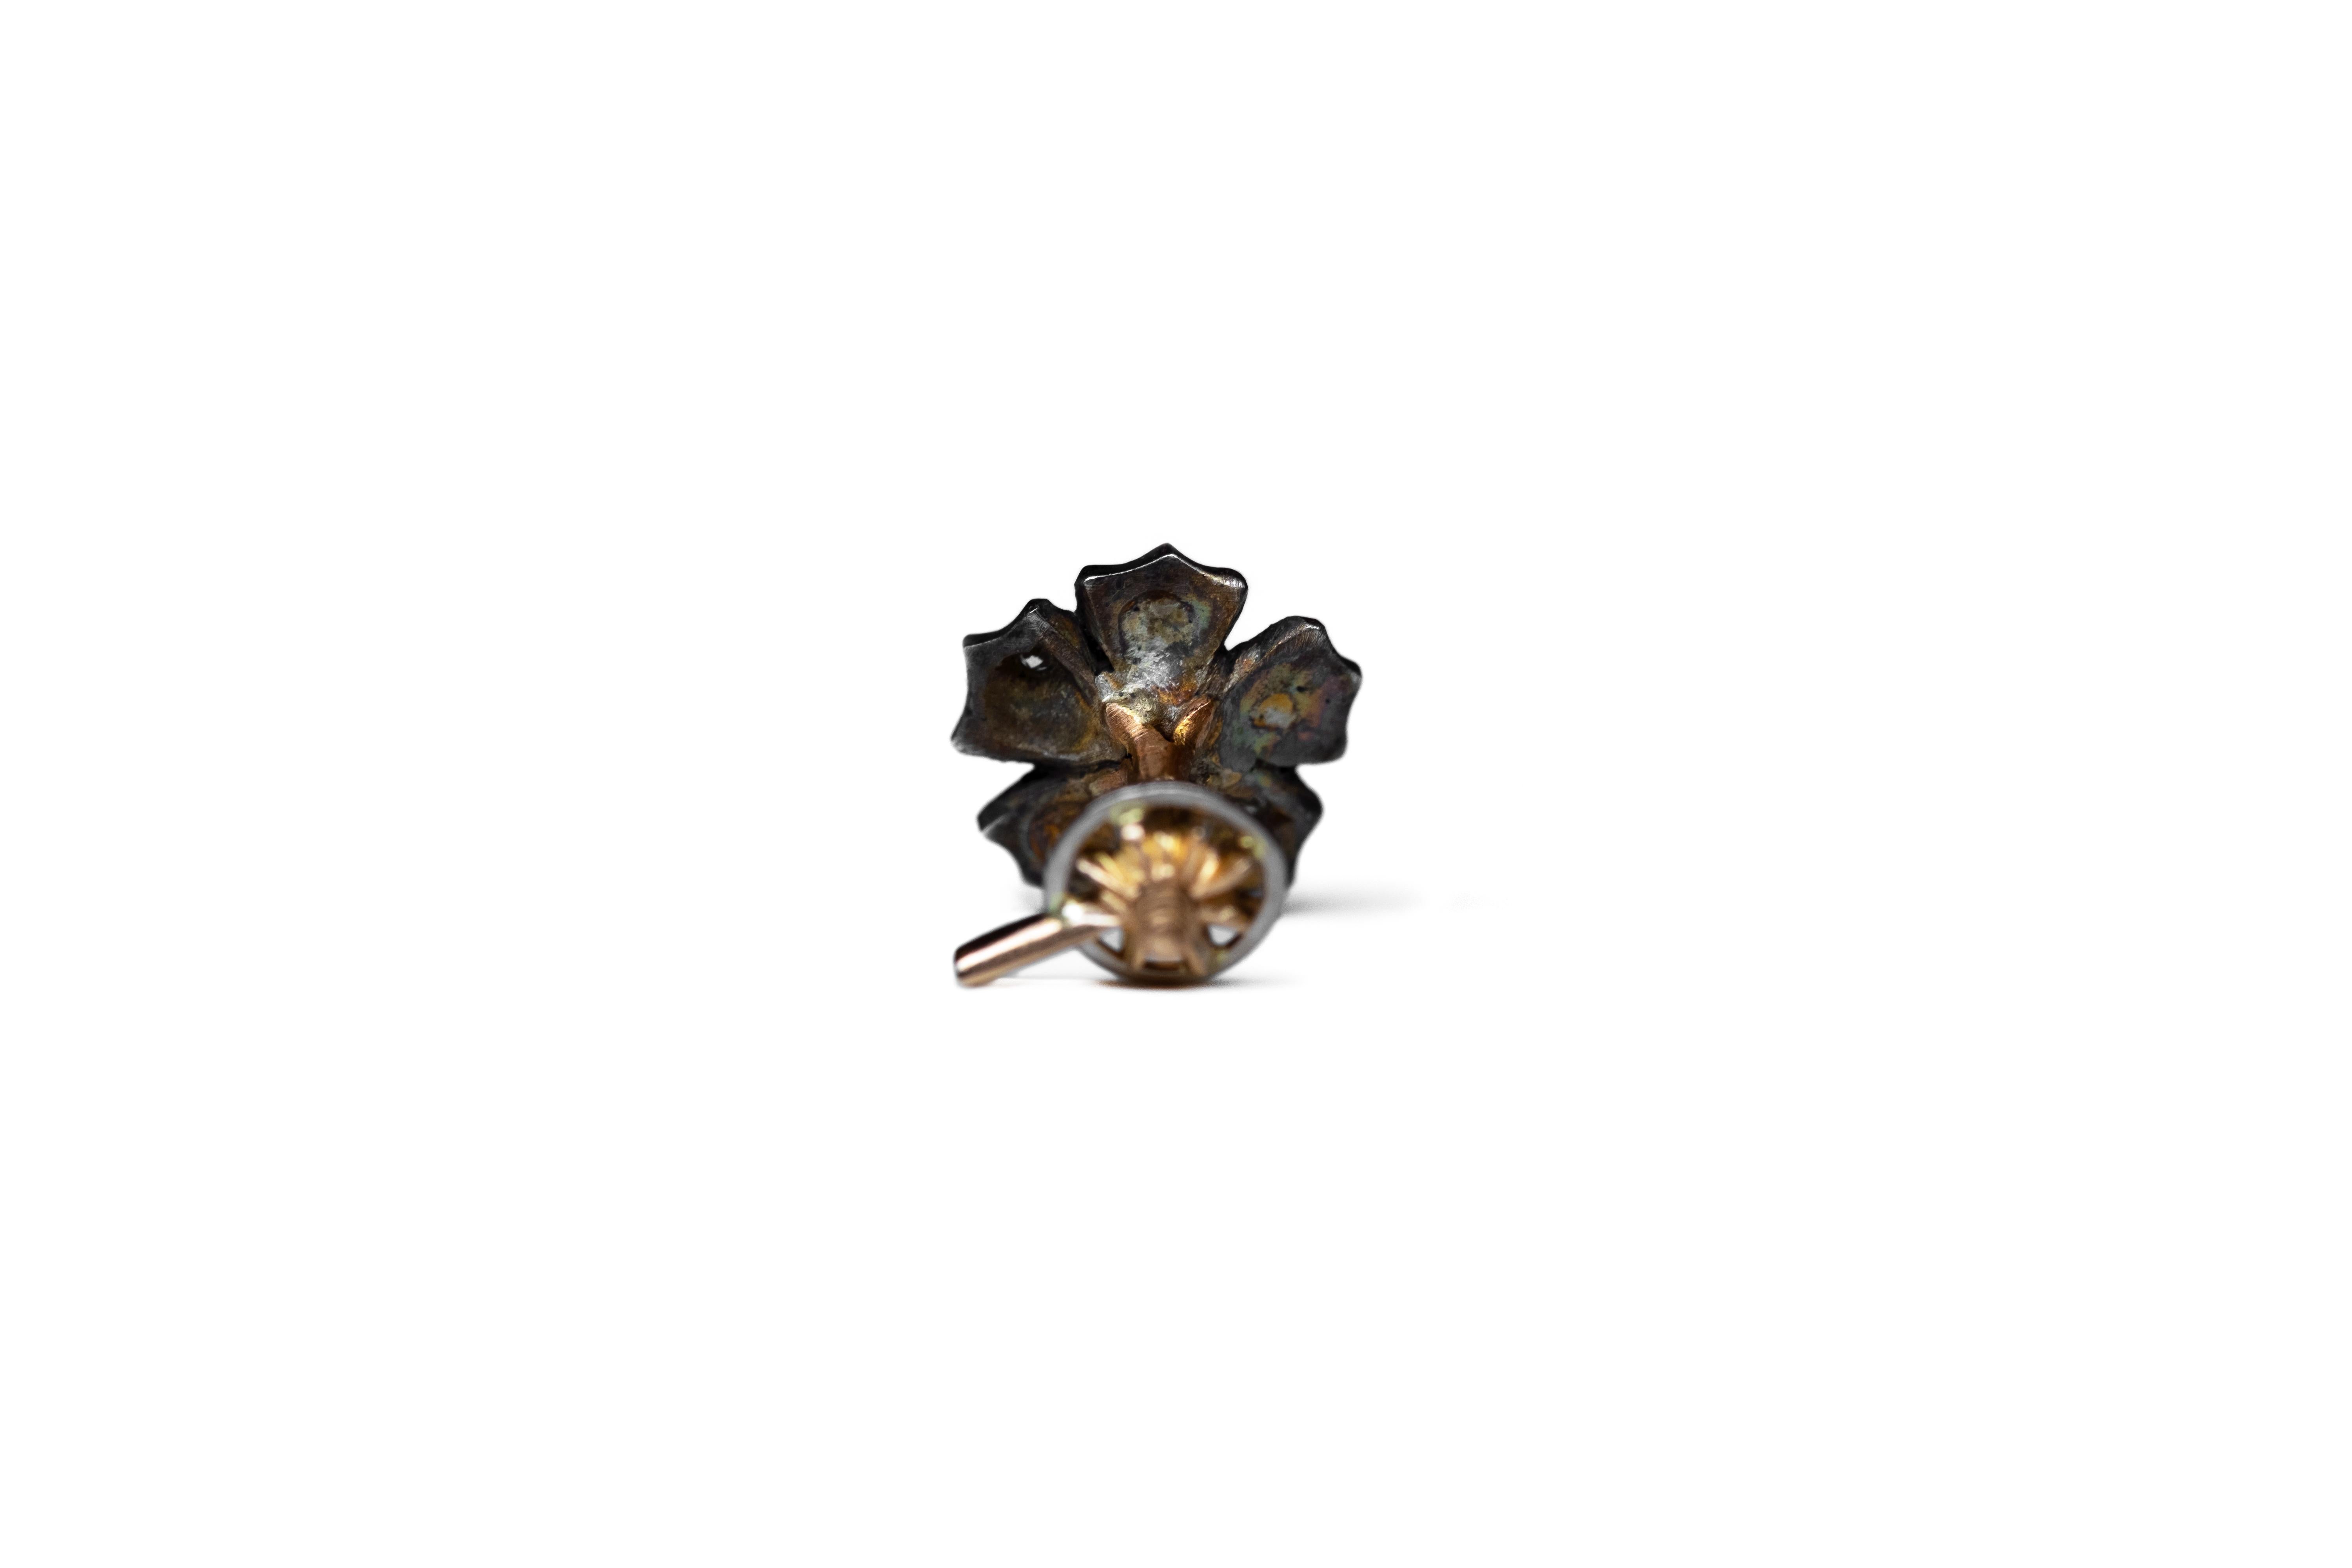 Contemporary 18K Fairmined Gold and Silver, Canadamark Diamonds, Handmade, Flower Piercing #2 For Sale